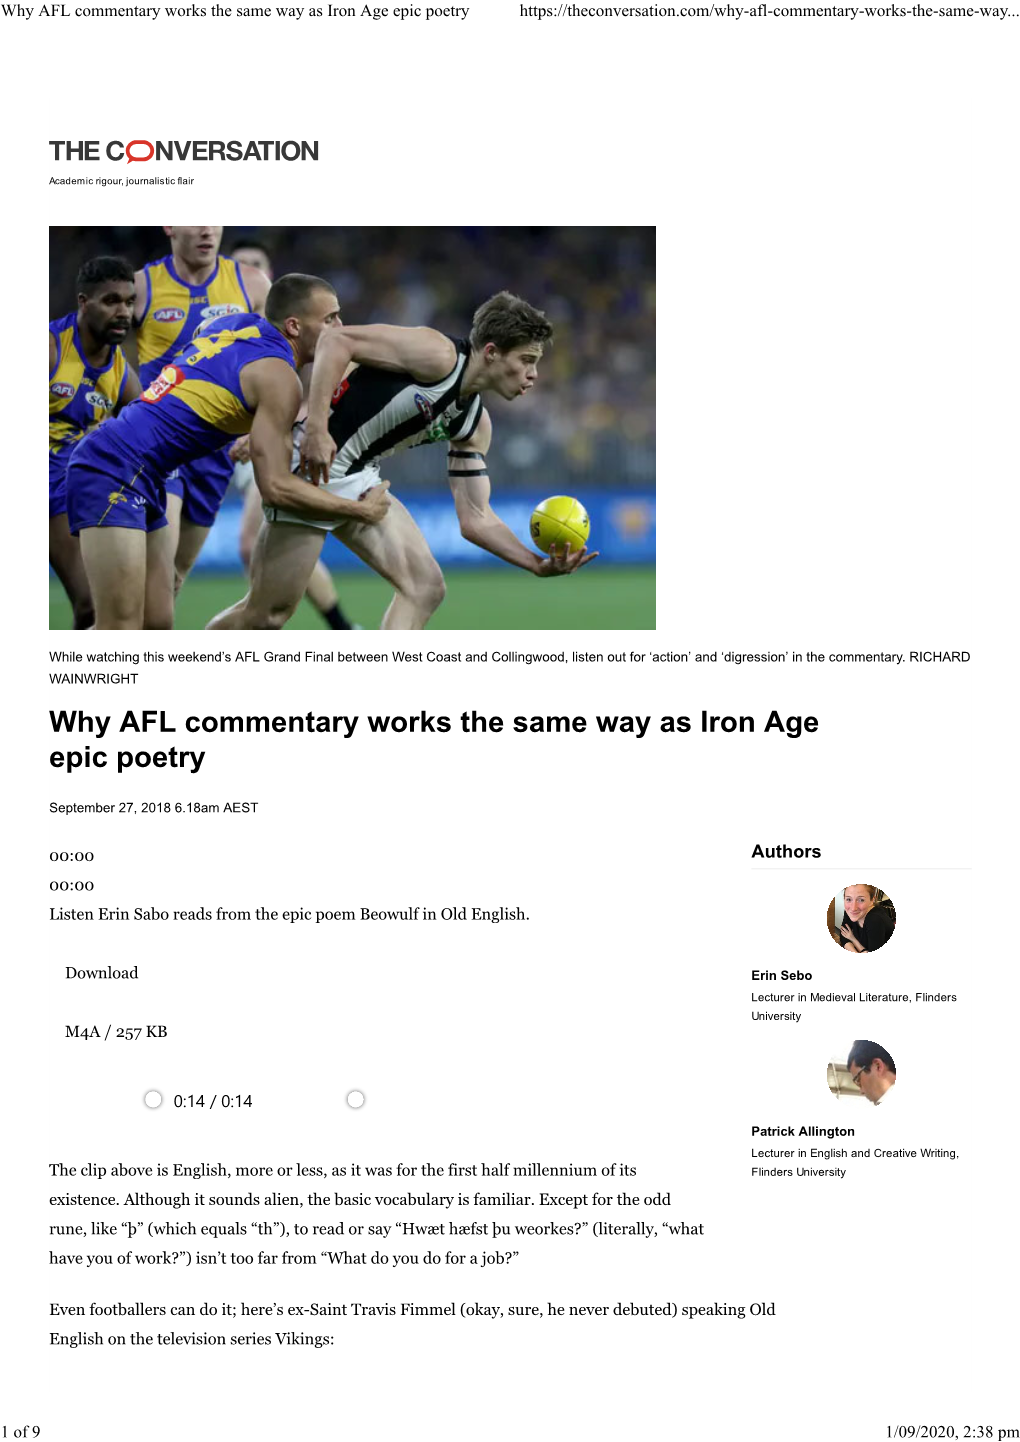 Why AFL Commentary Works the Same Way As Iron Age Epic Poetry